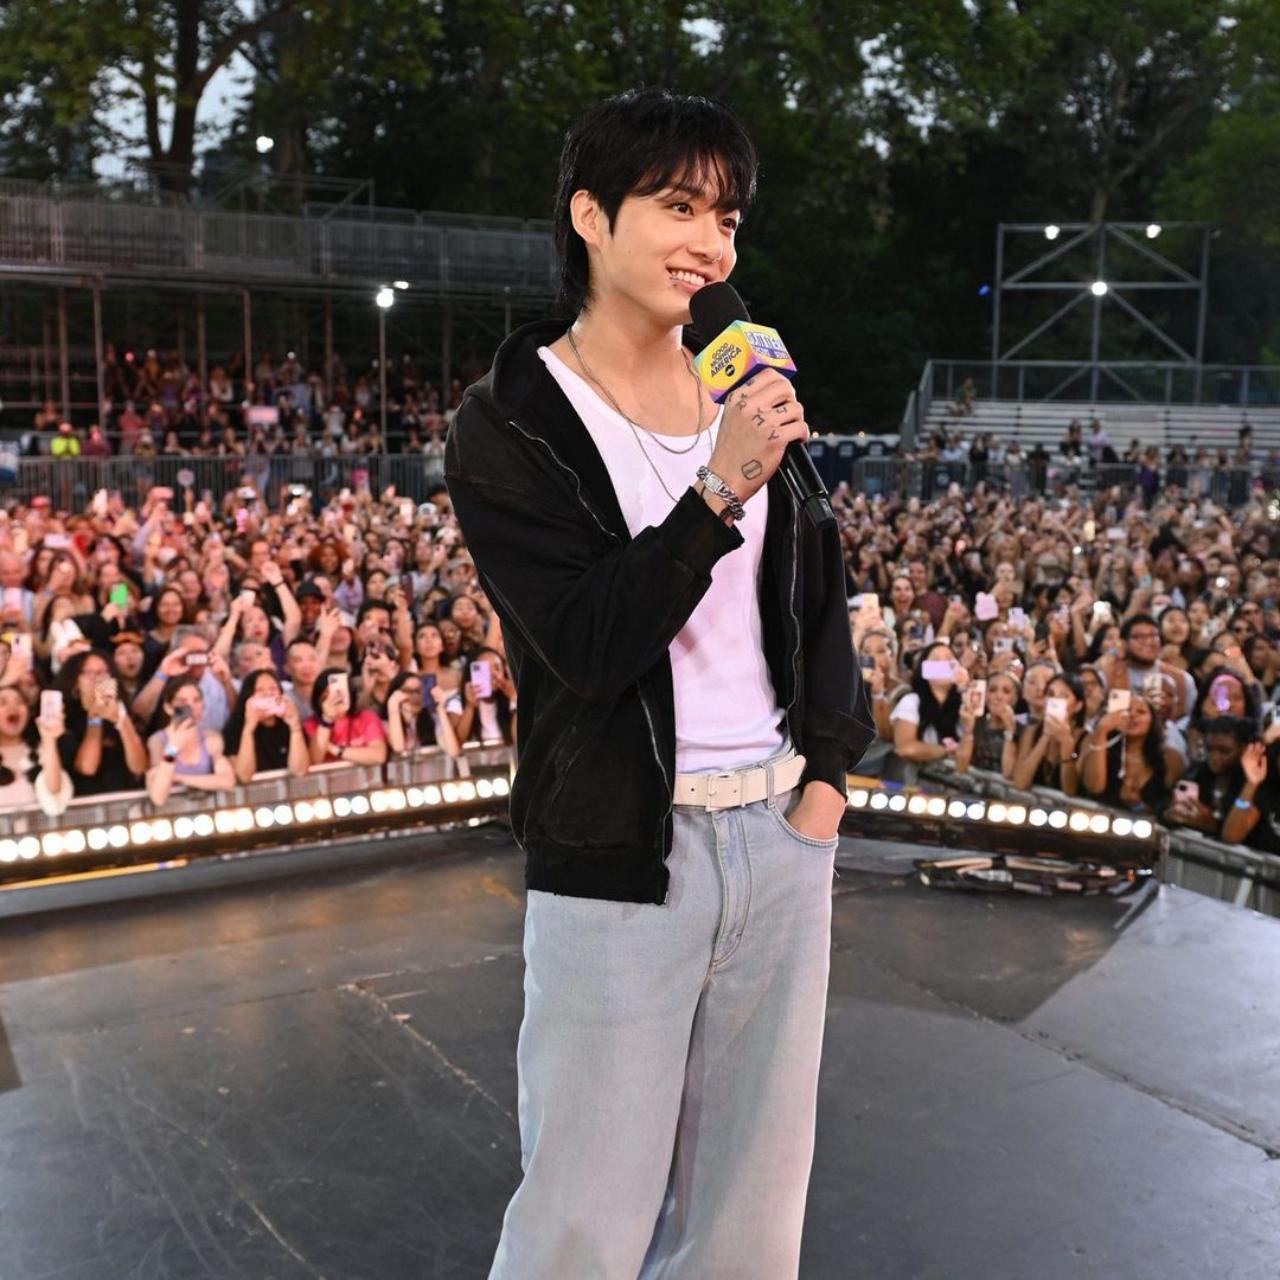 Jungkook endeared himself to his fans even more with his cute 'Good Morning America'! For the soundcheck, he was simpky dressed in a white t-shirt, classic black hoodie and jeans